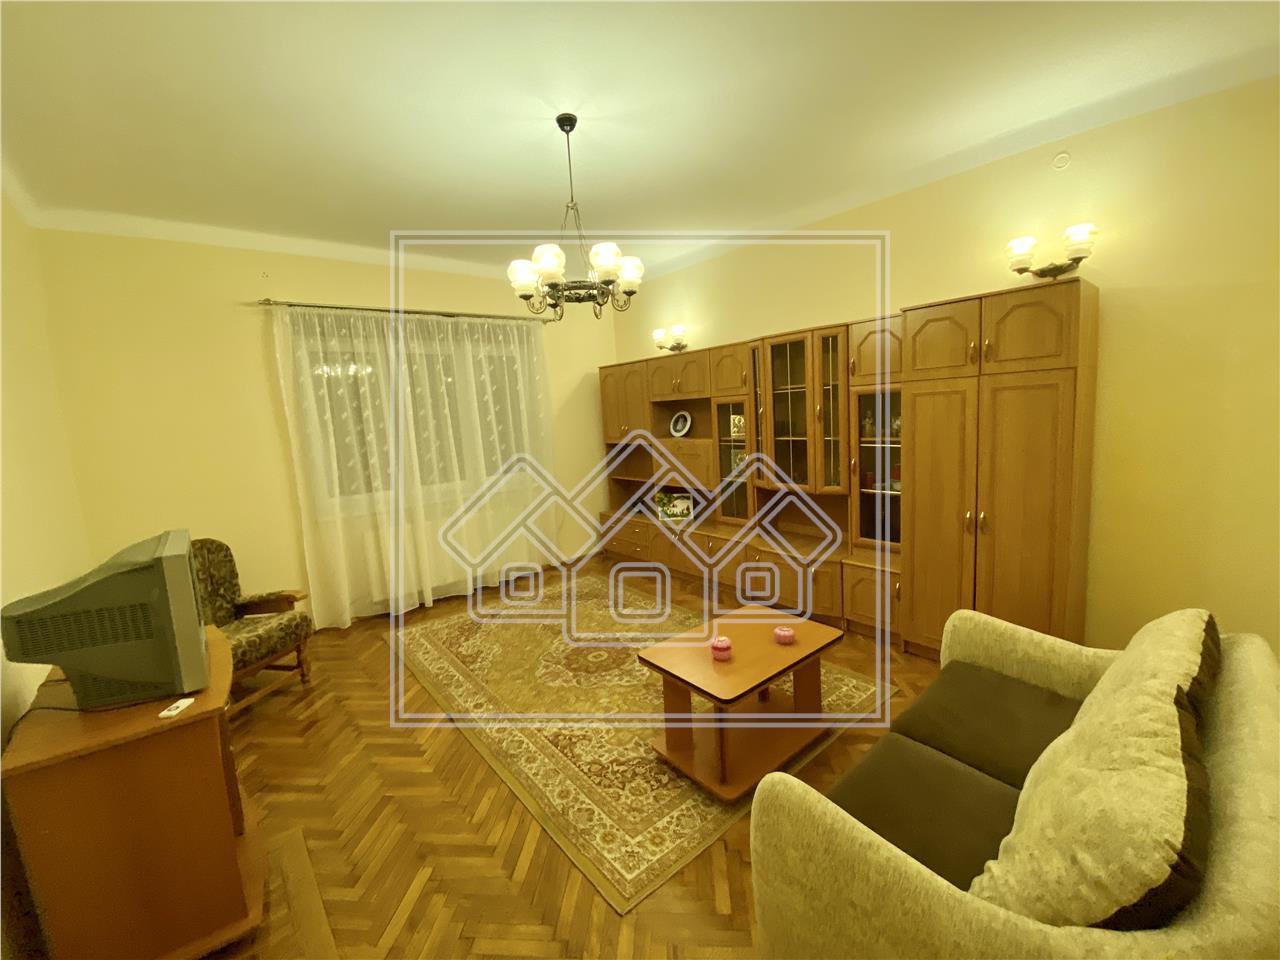 House for rent in Sibiu - Milea area - turnkey delivery